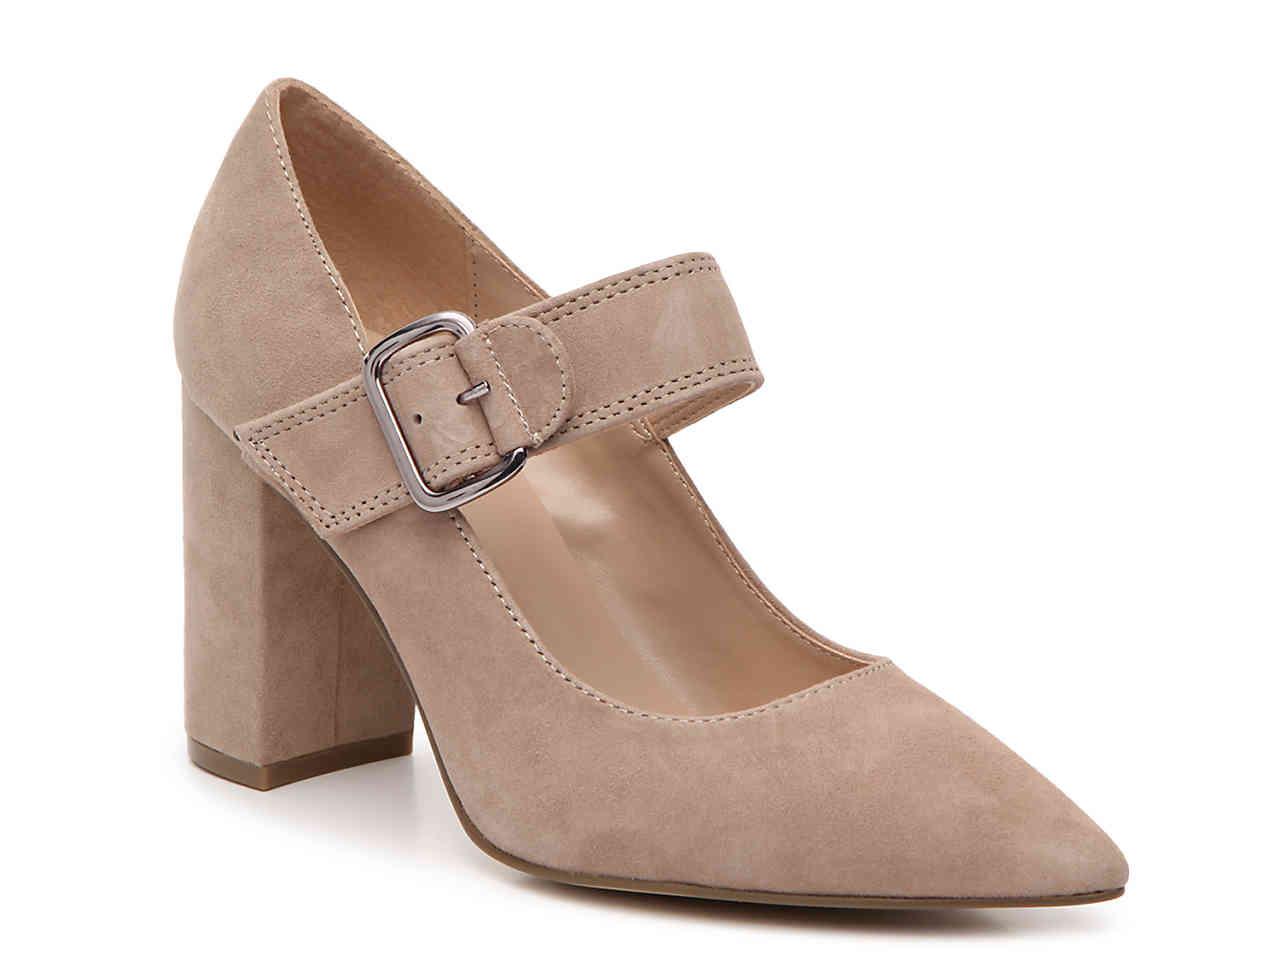 Tommy Hilfiger Venture Pump in Taupe 